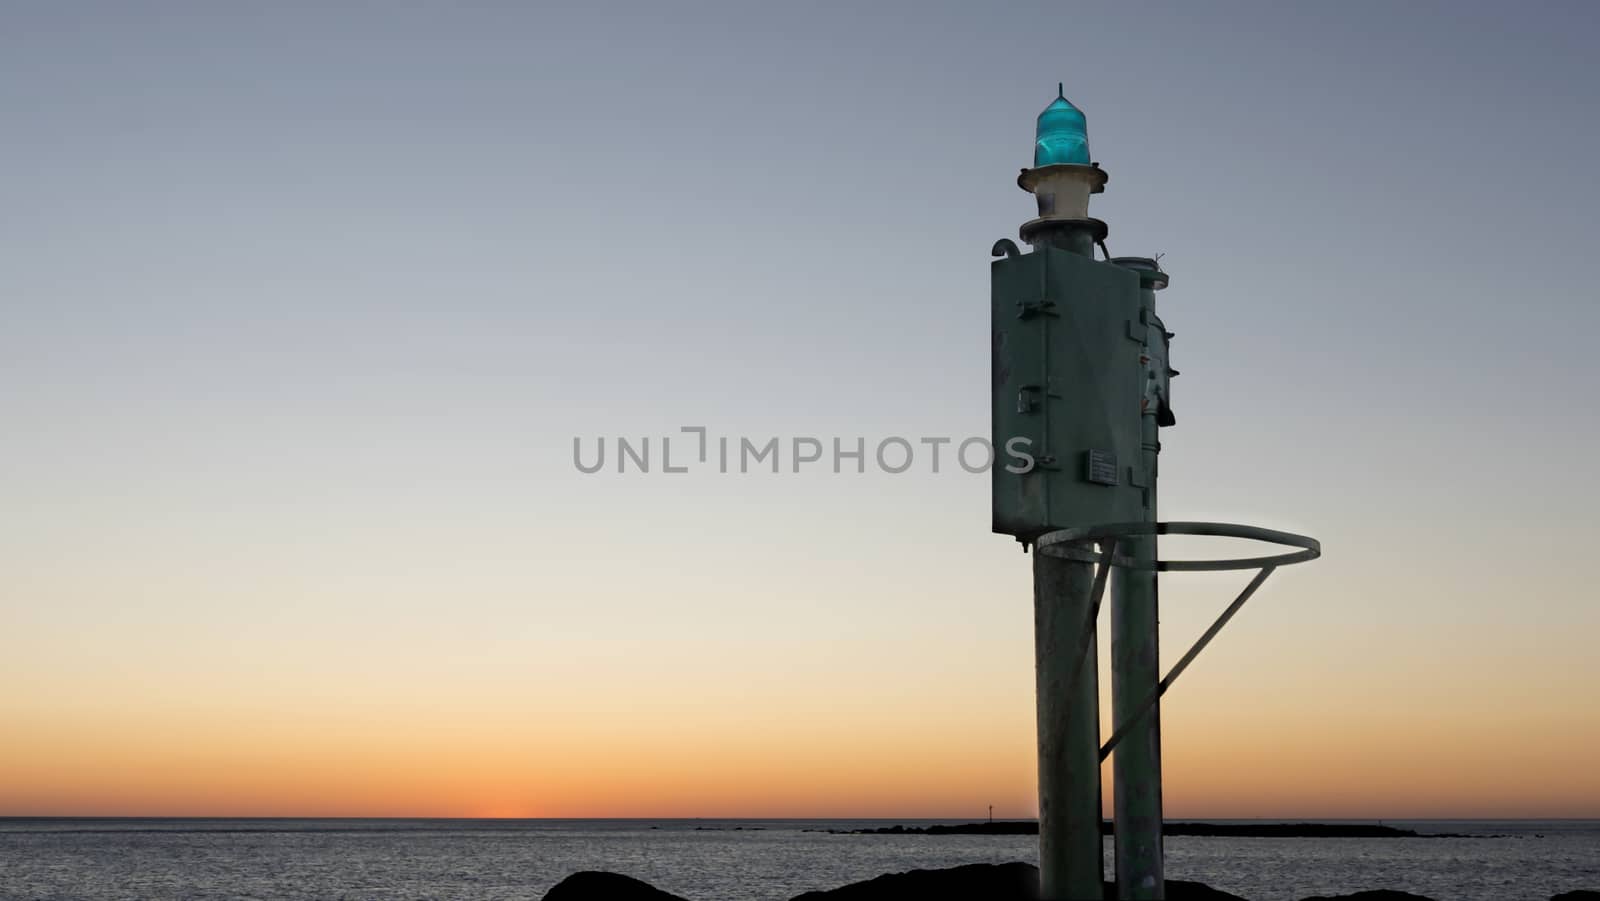 The sea at dawn or sunset with a small lighthouse in the harbor in the foreground by robbyfontanesi